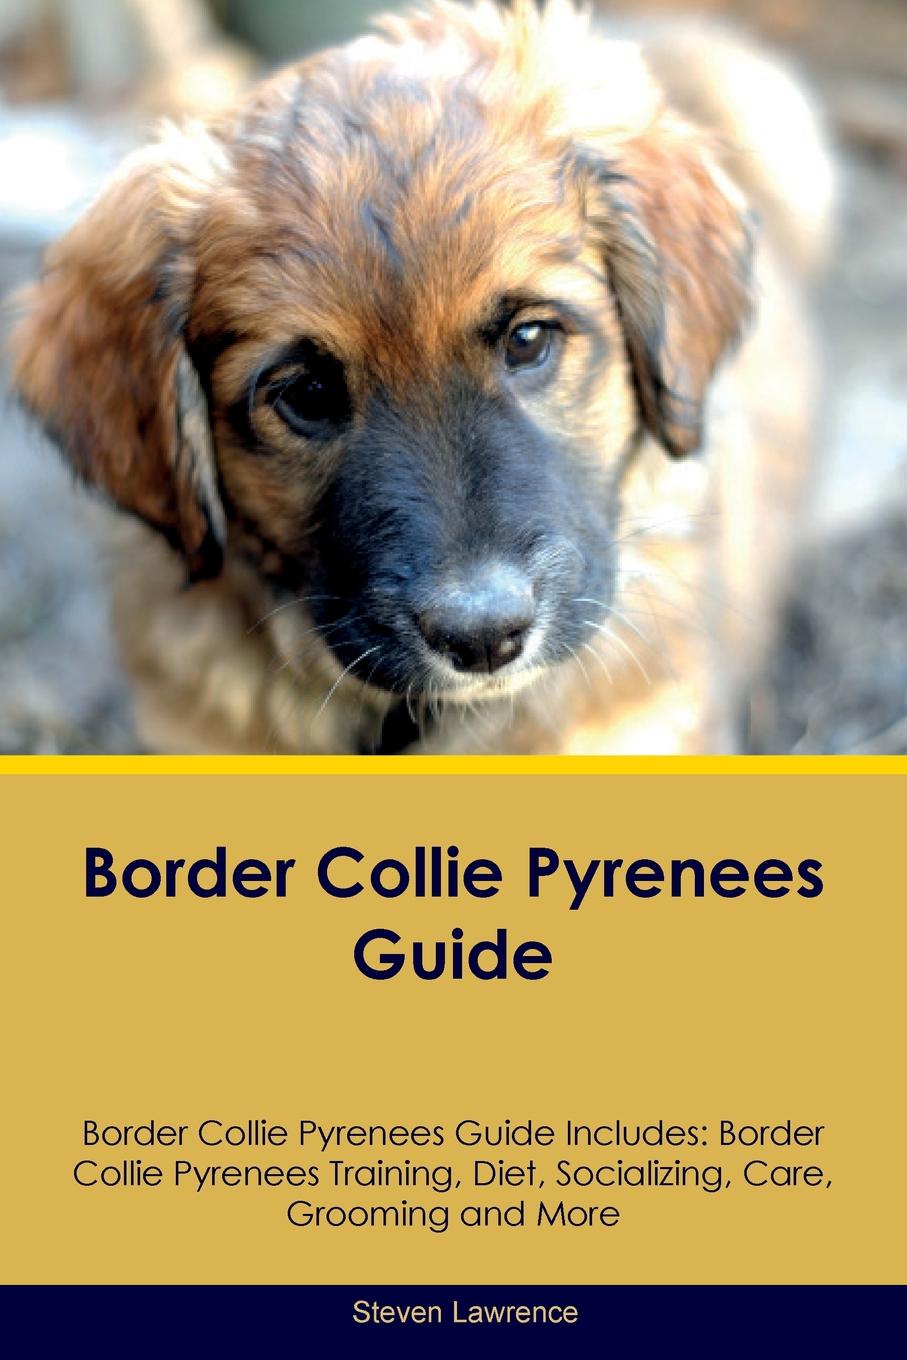 Border Collie Pyrenees Guide Border Collie Pyrenees Guide Includes. Border Collie Pyrenees Training, Diet, Socializing, Care, Grooming, Breeding and More